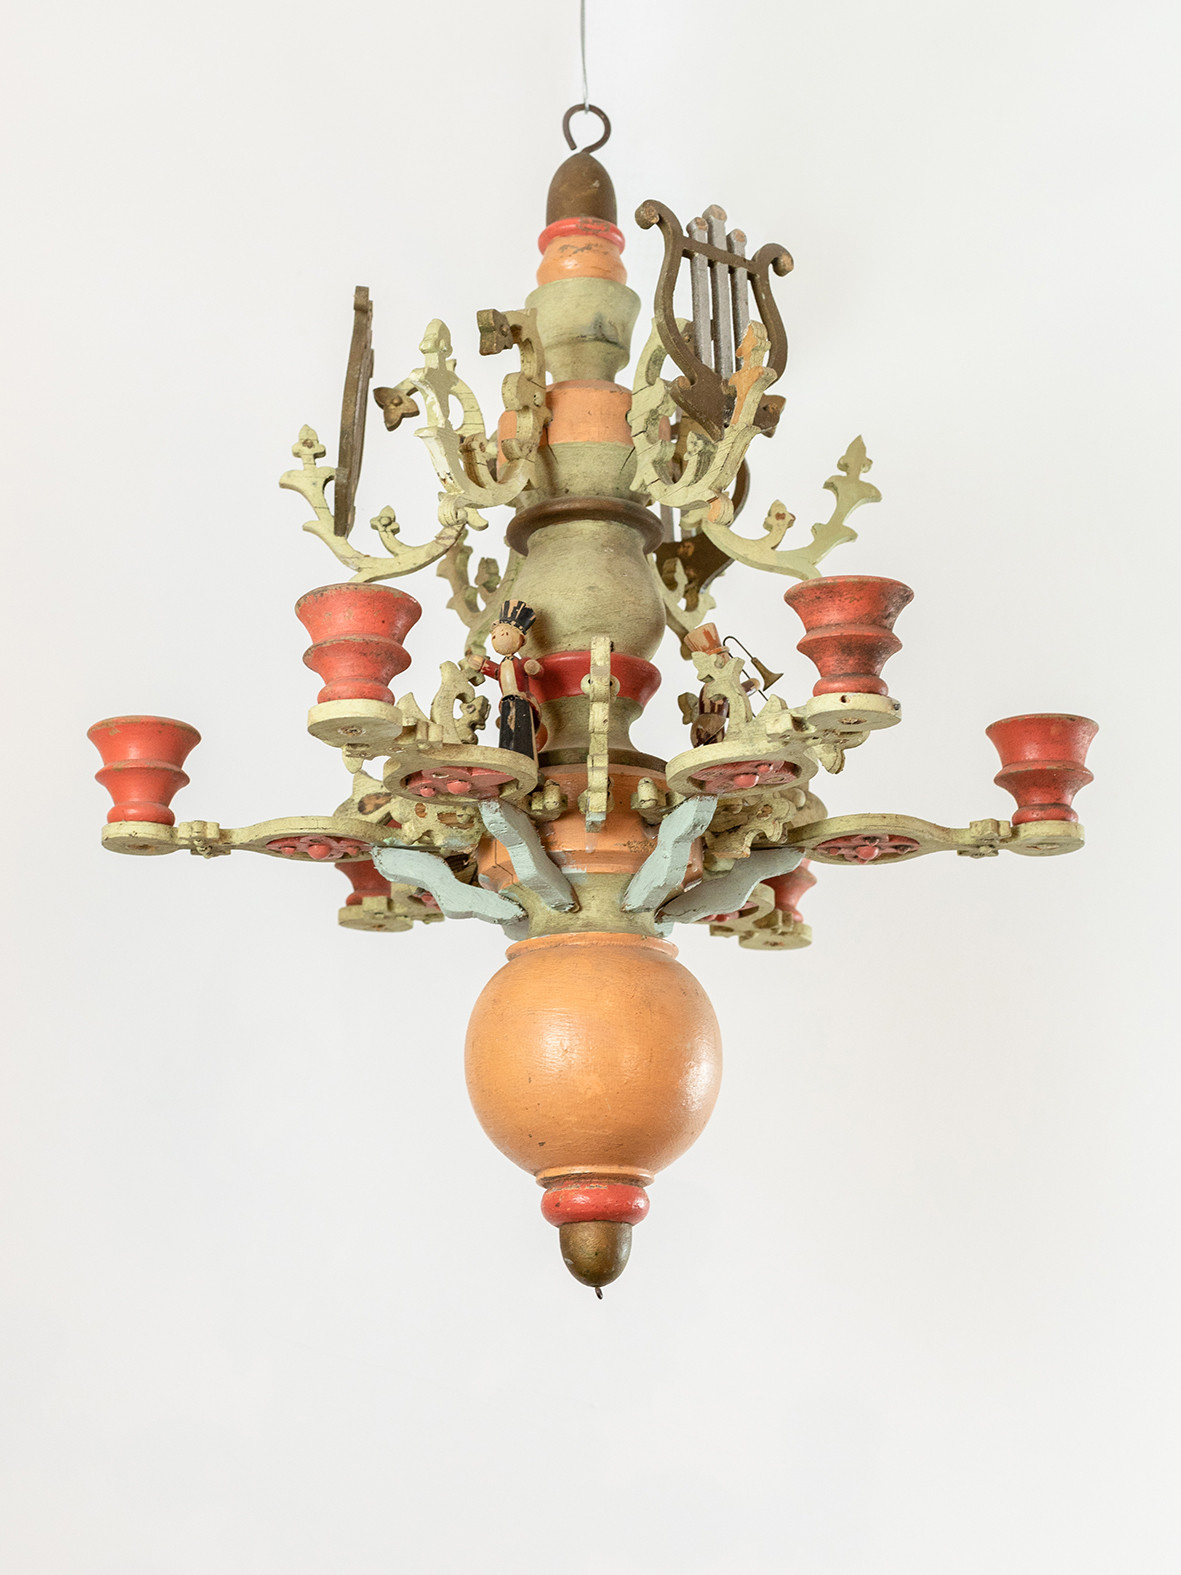 Chandelier in Polychrome wood